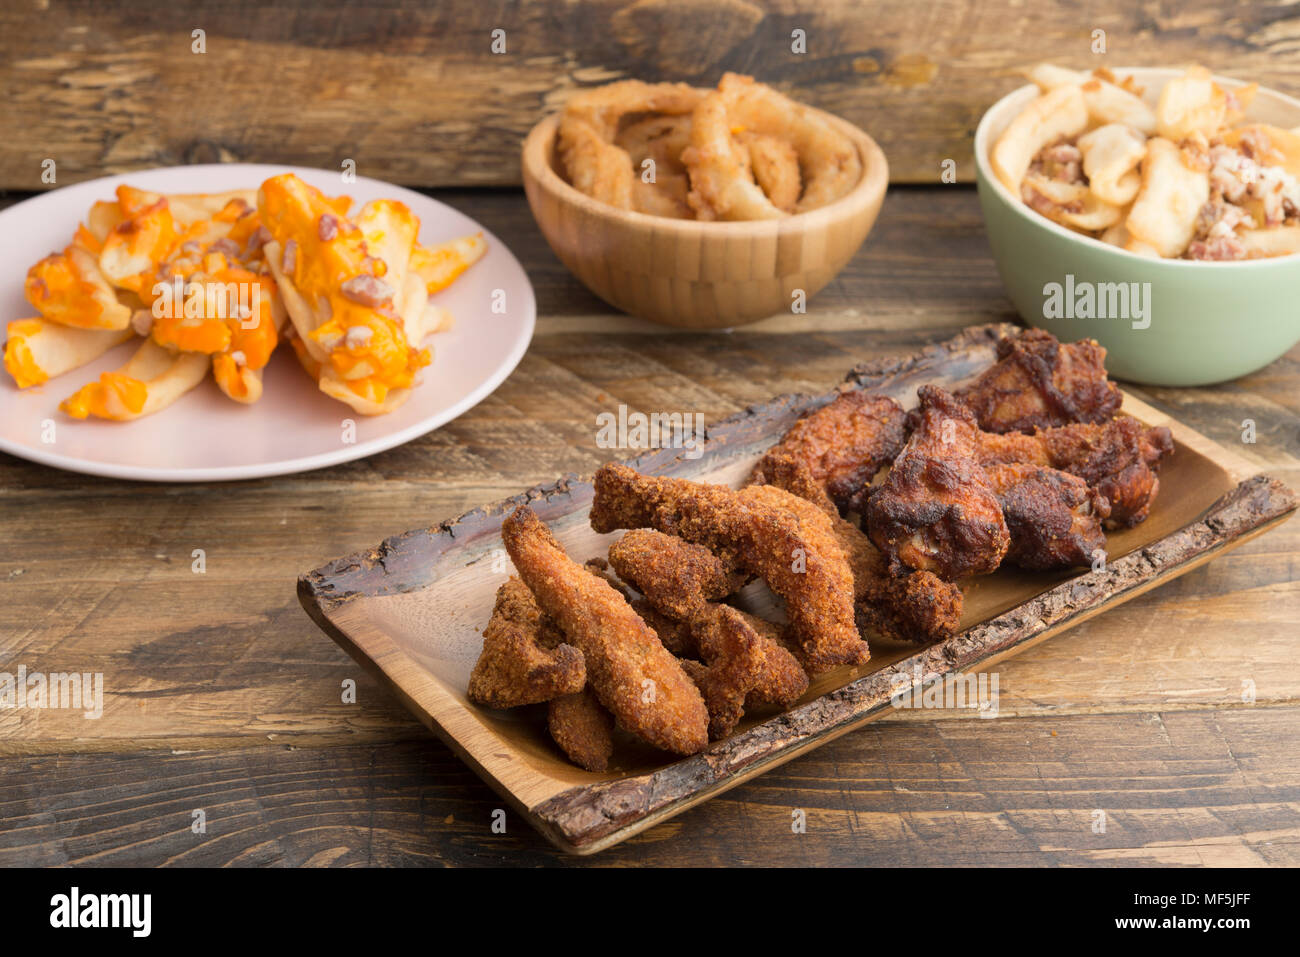 Typical american food, potatoes with cheese and bacon, fried onion rings and chicken wings Stock Photo